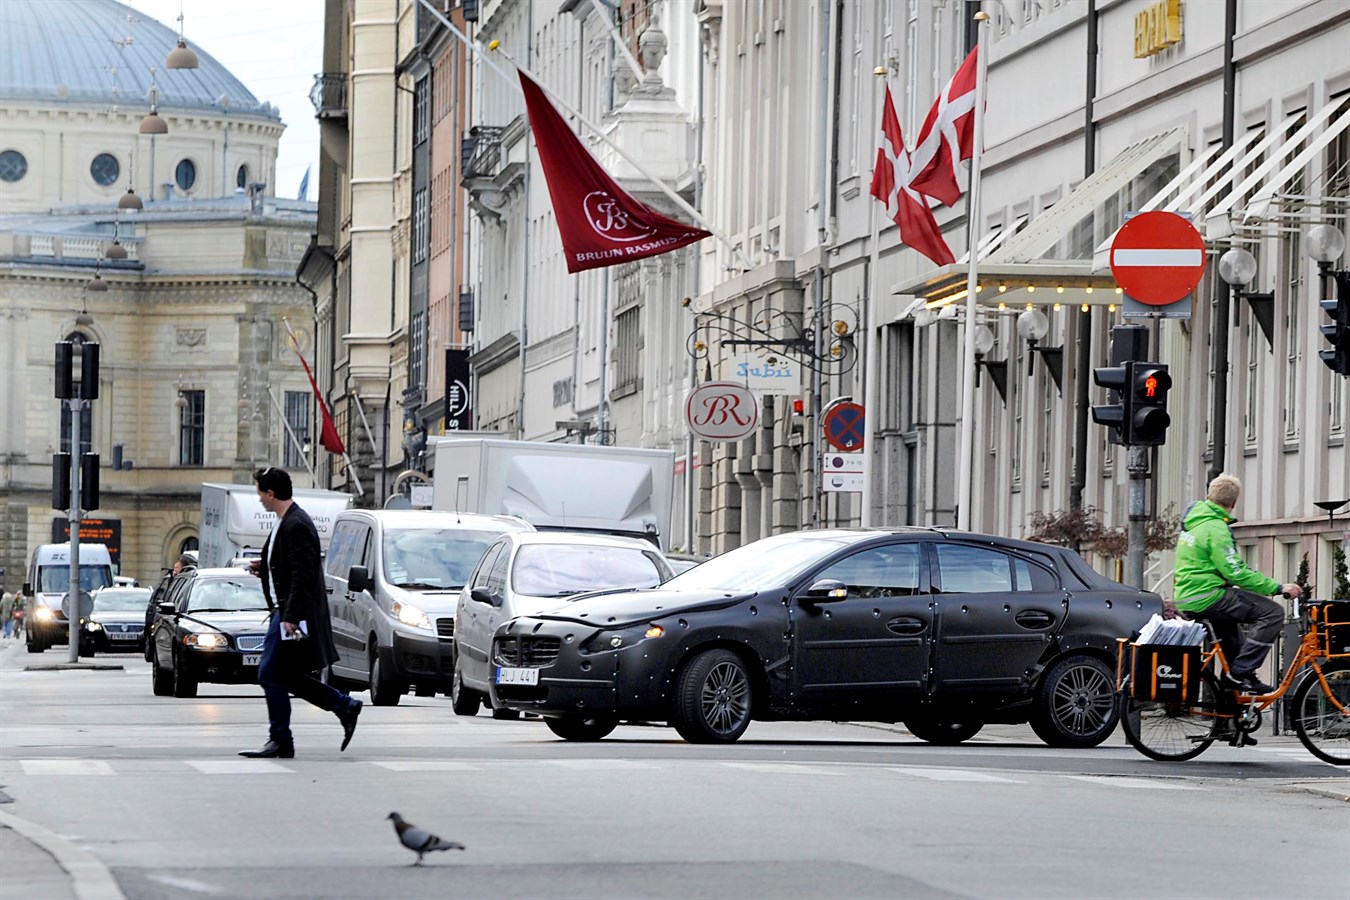 Disguised Volvo S60, testing pedestrian protection system in Copenhagen.